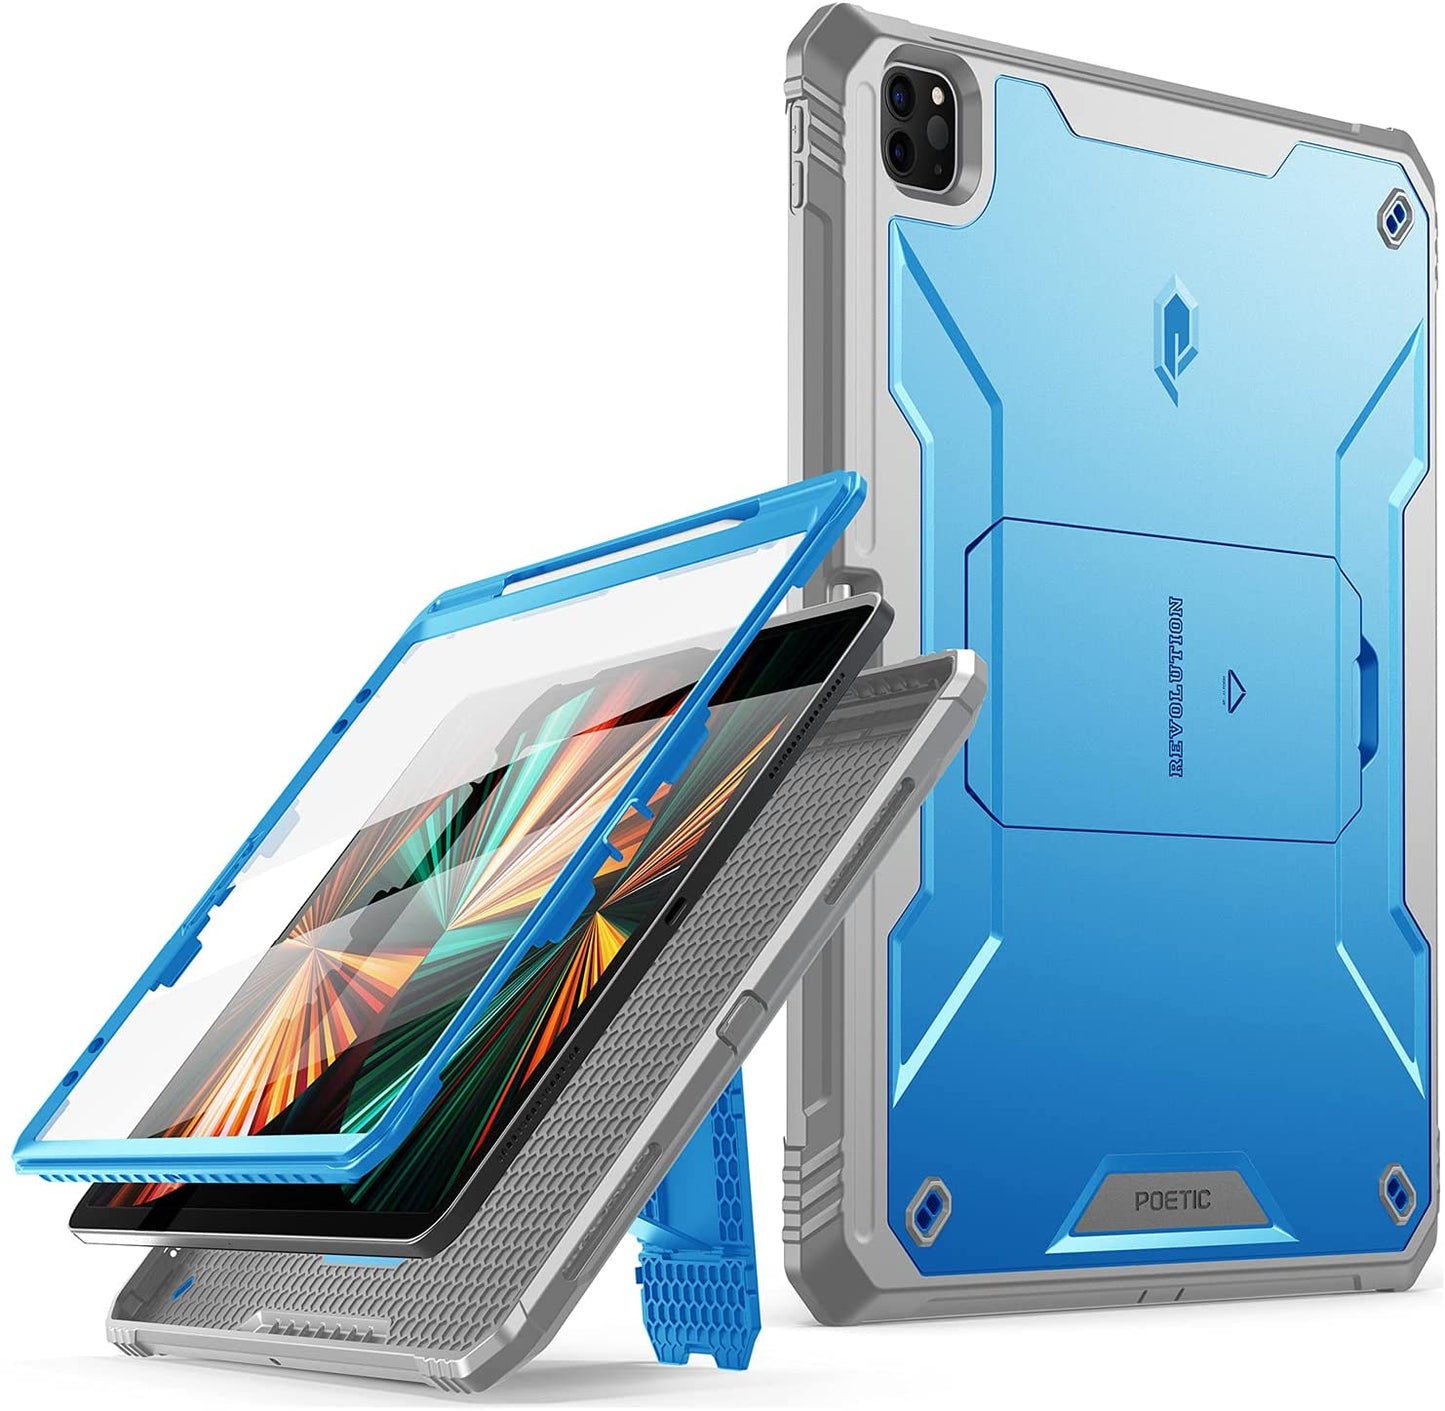 Poetic Revolution Case for iPad 10.9 10th Gen (2022), Built-in Screen Protector with Kickstand, Blue/Gray, Size: One Size